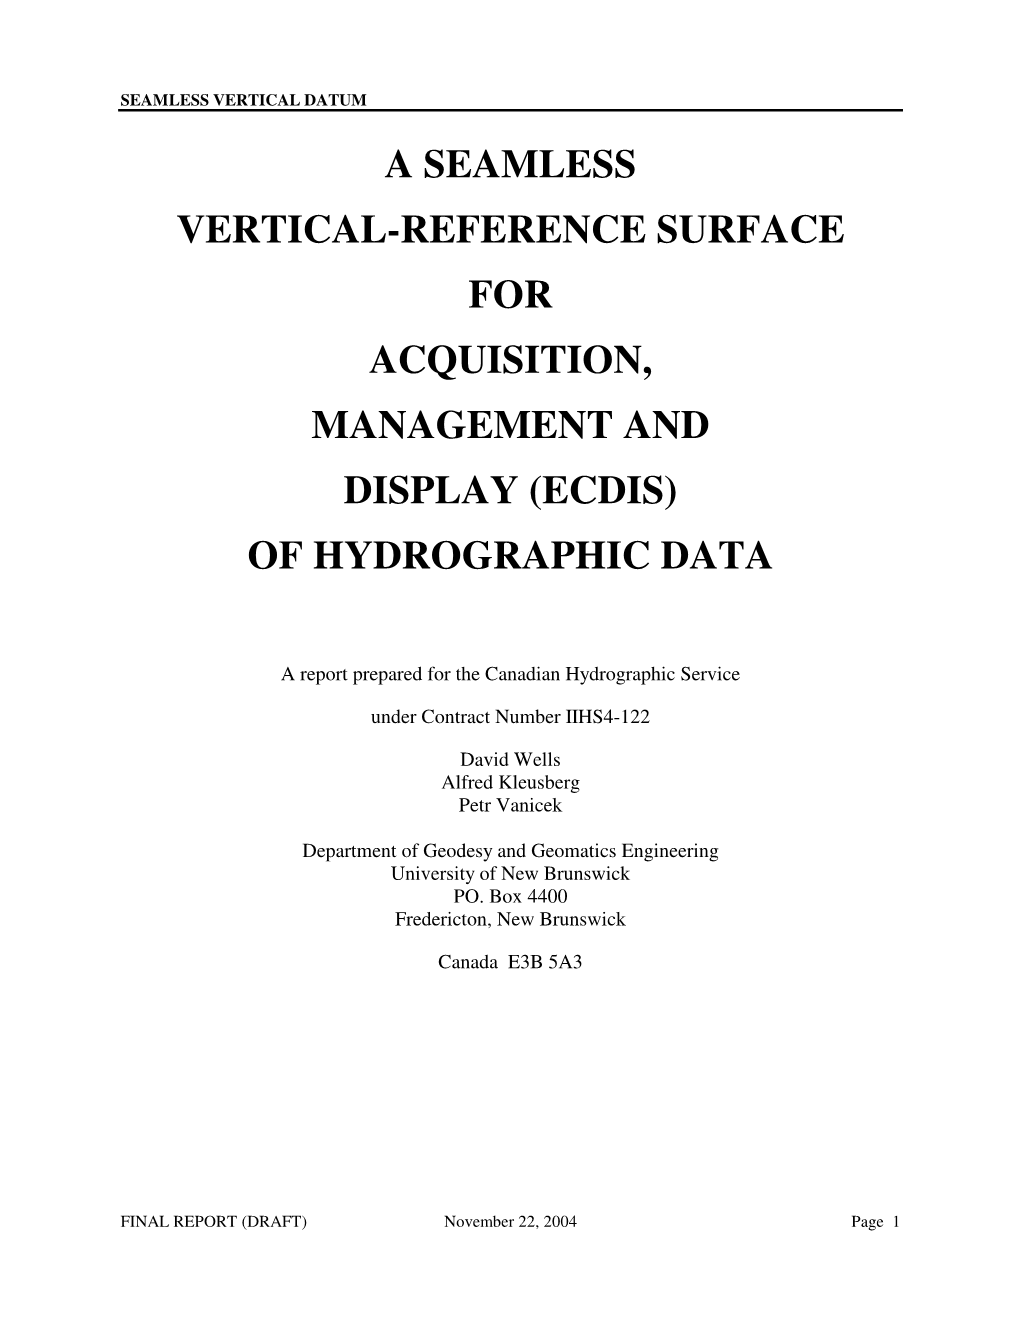 A Seamless Vertical-Reference Surface for Acquisition, Management and Display (Ecdis) of Hydrographic Data